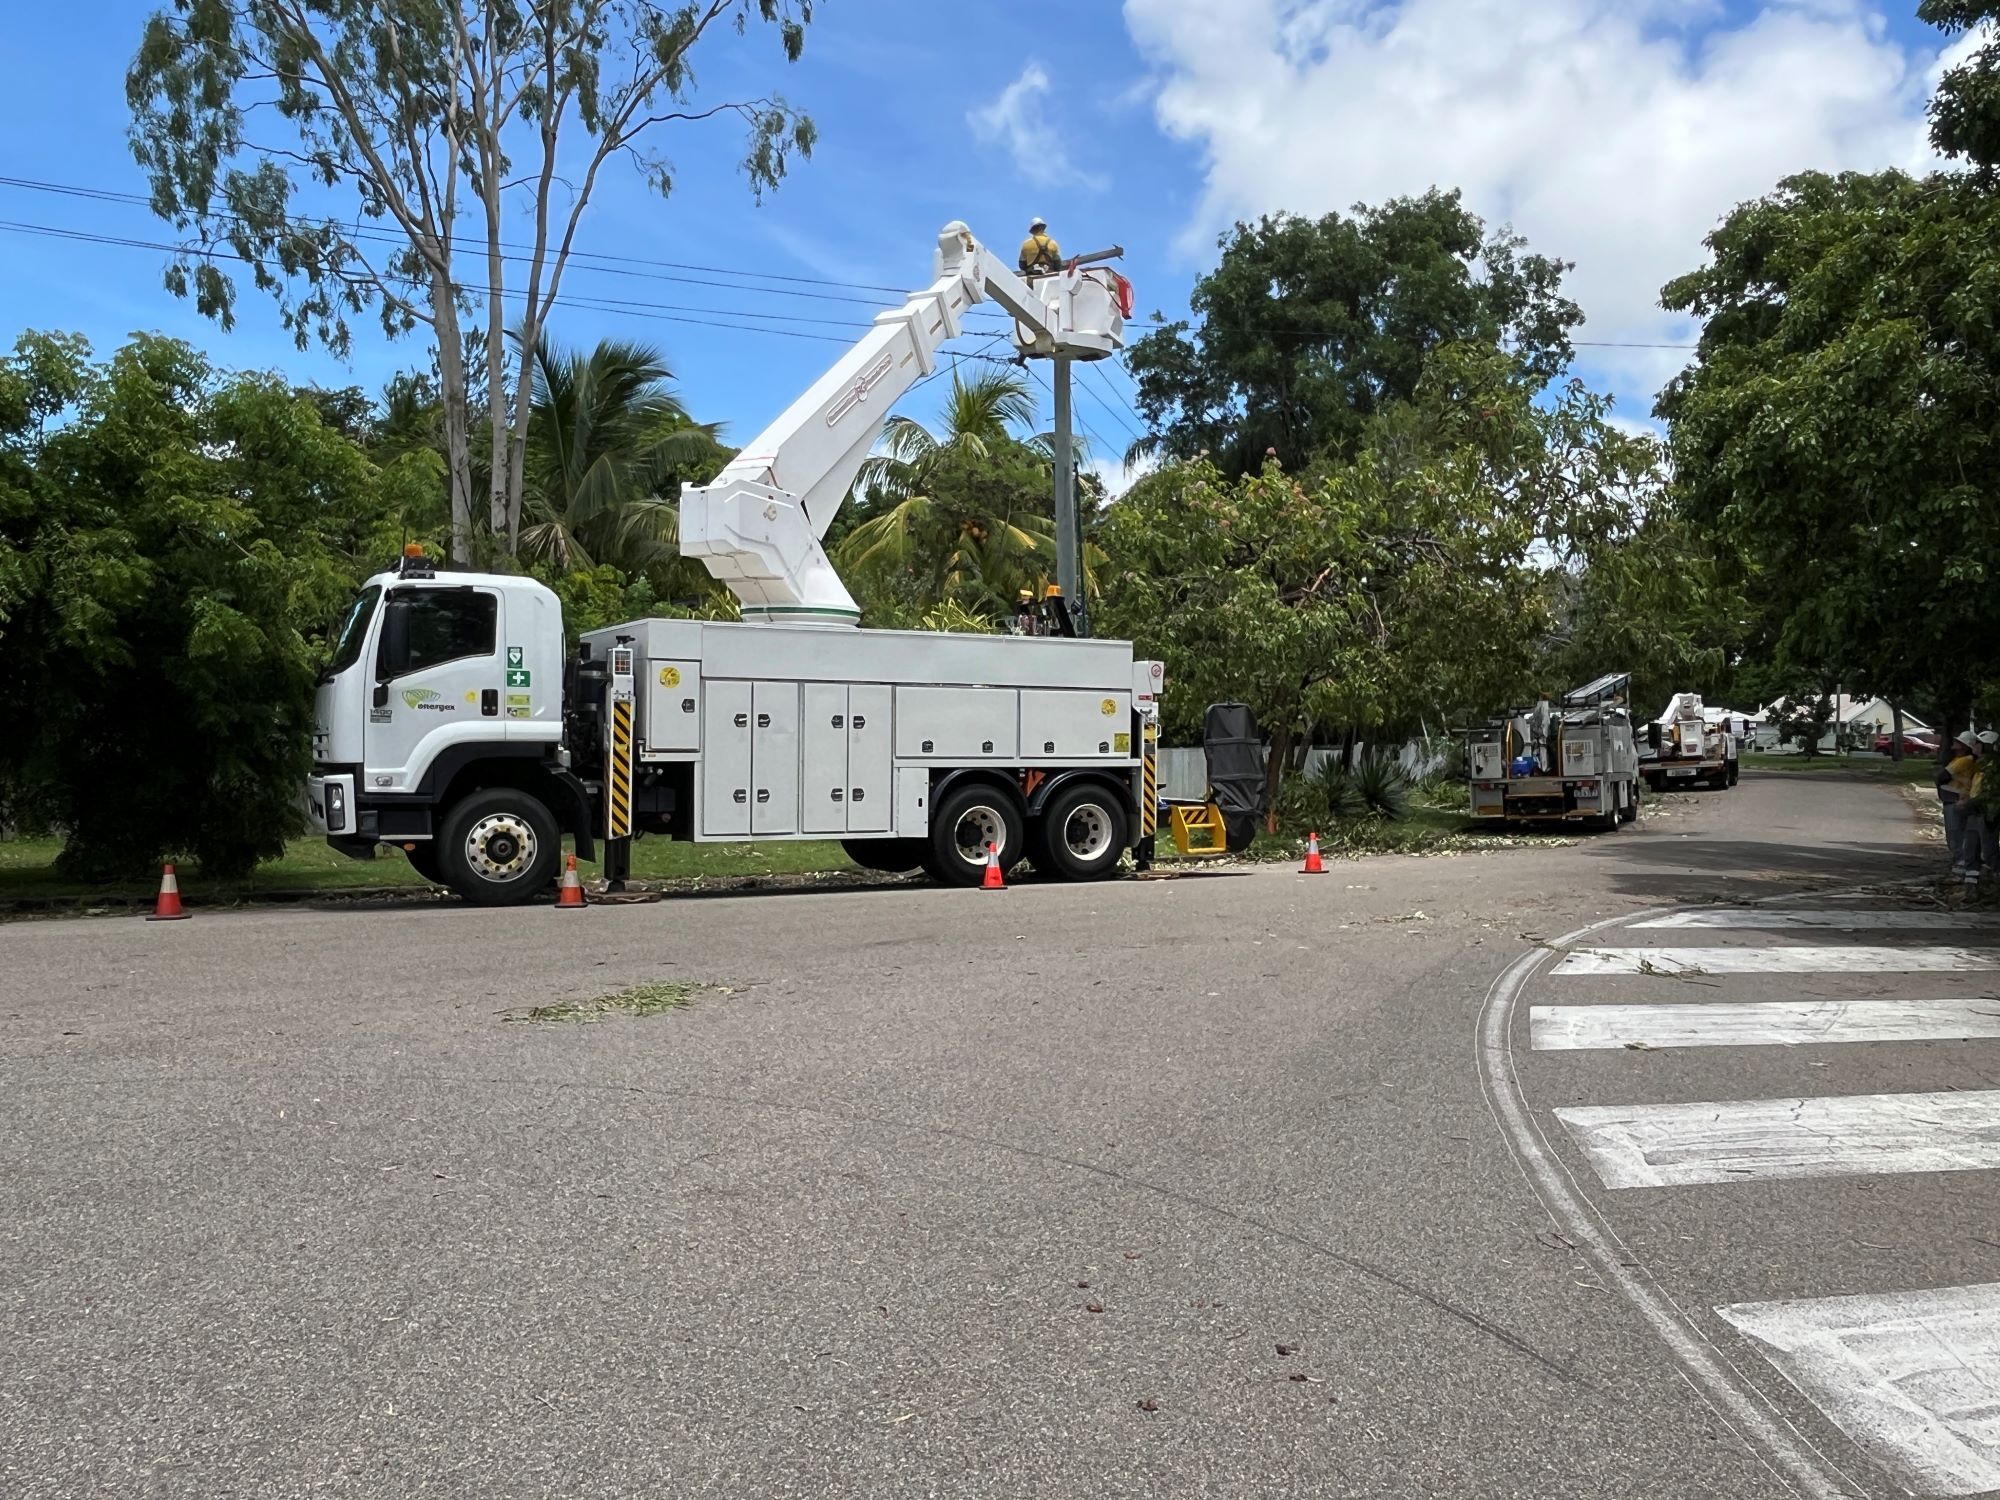 Crews working on pole cherry picker in a street after Cyclone Kirrily